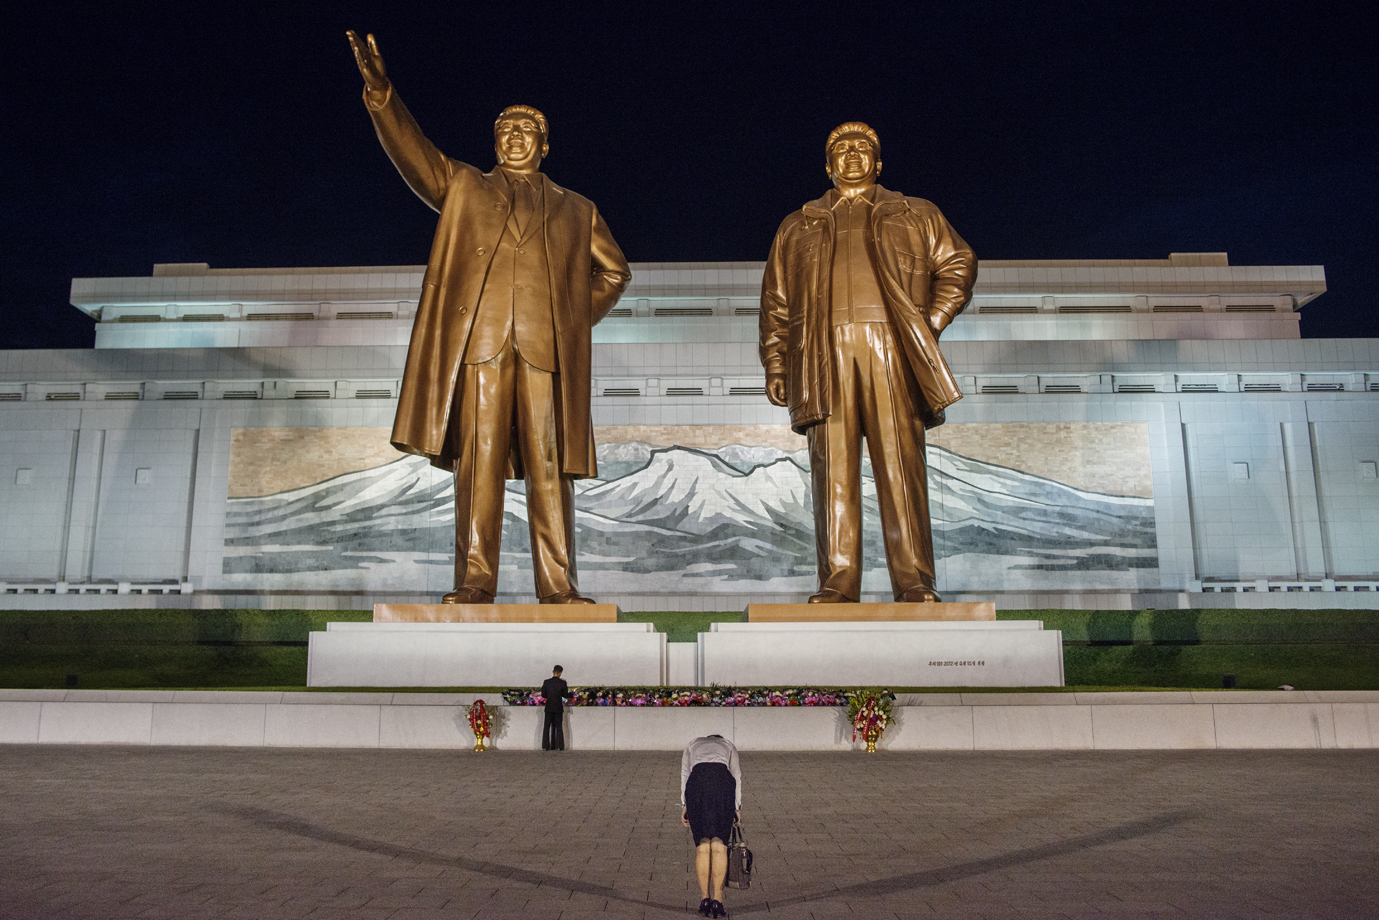  A woman bowing infront of the statues of the deceased leaders Kim il-sung and Kim Jong-il, Pyongyang / North Korea - 2013 